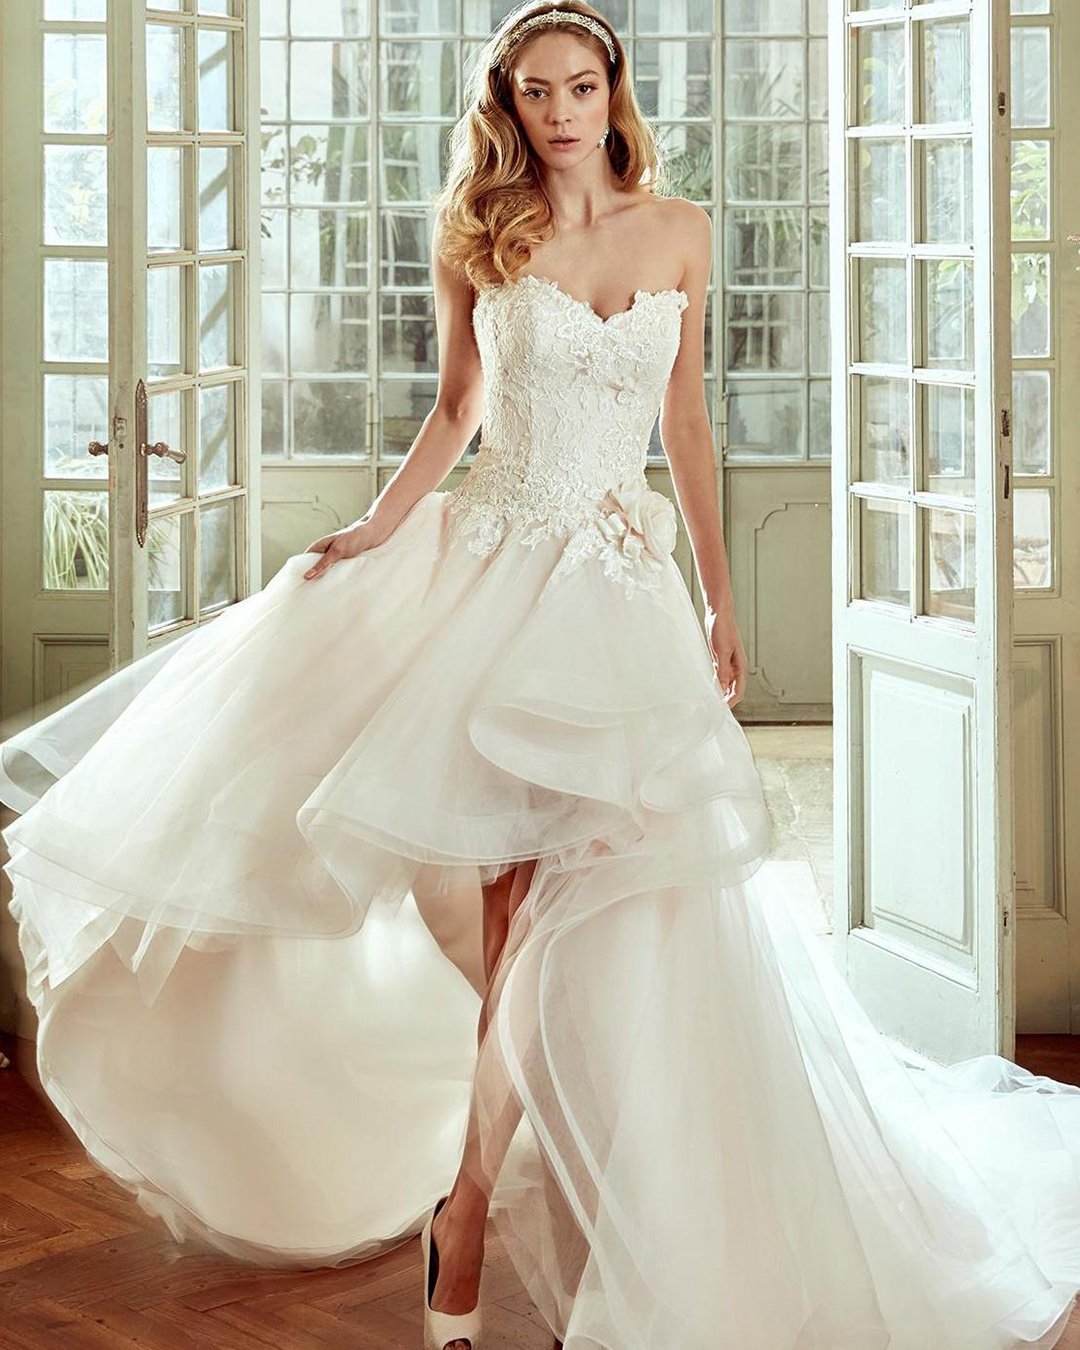 high low wedding dresses sweetheart strapless neckline lace tulle skirt nicole sposa